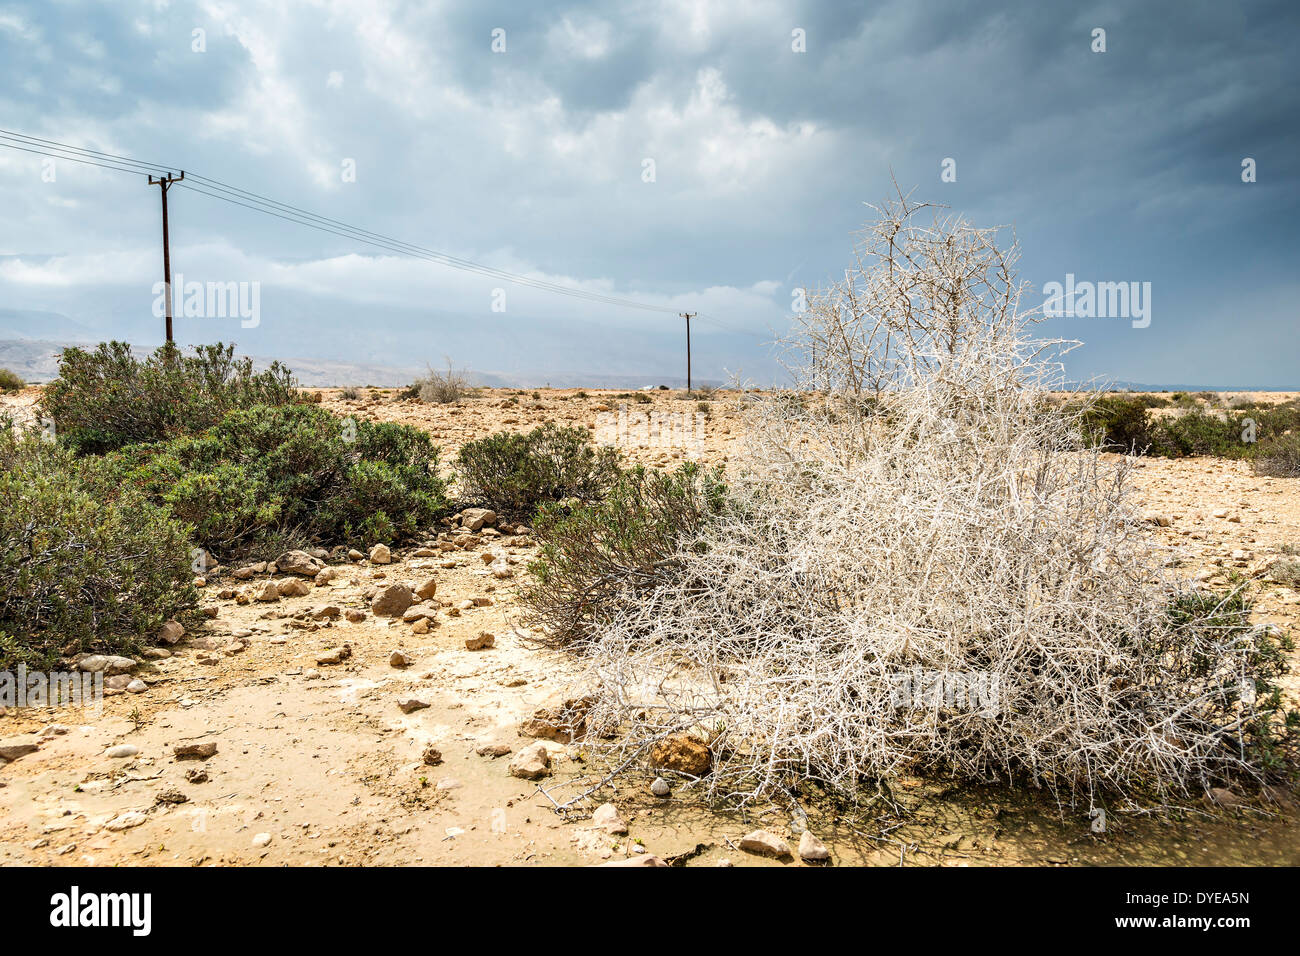 Landscape in Oman with sand, stones, bushes and grey clouds Stock Photo